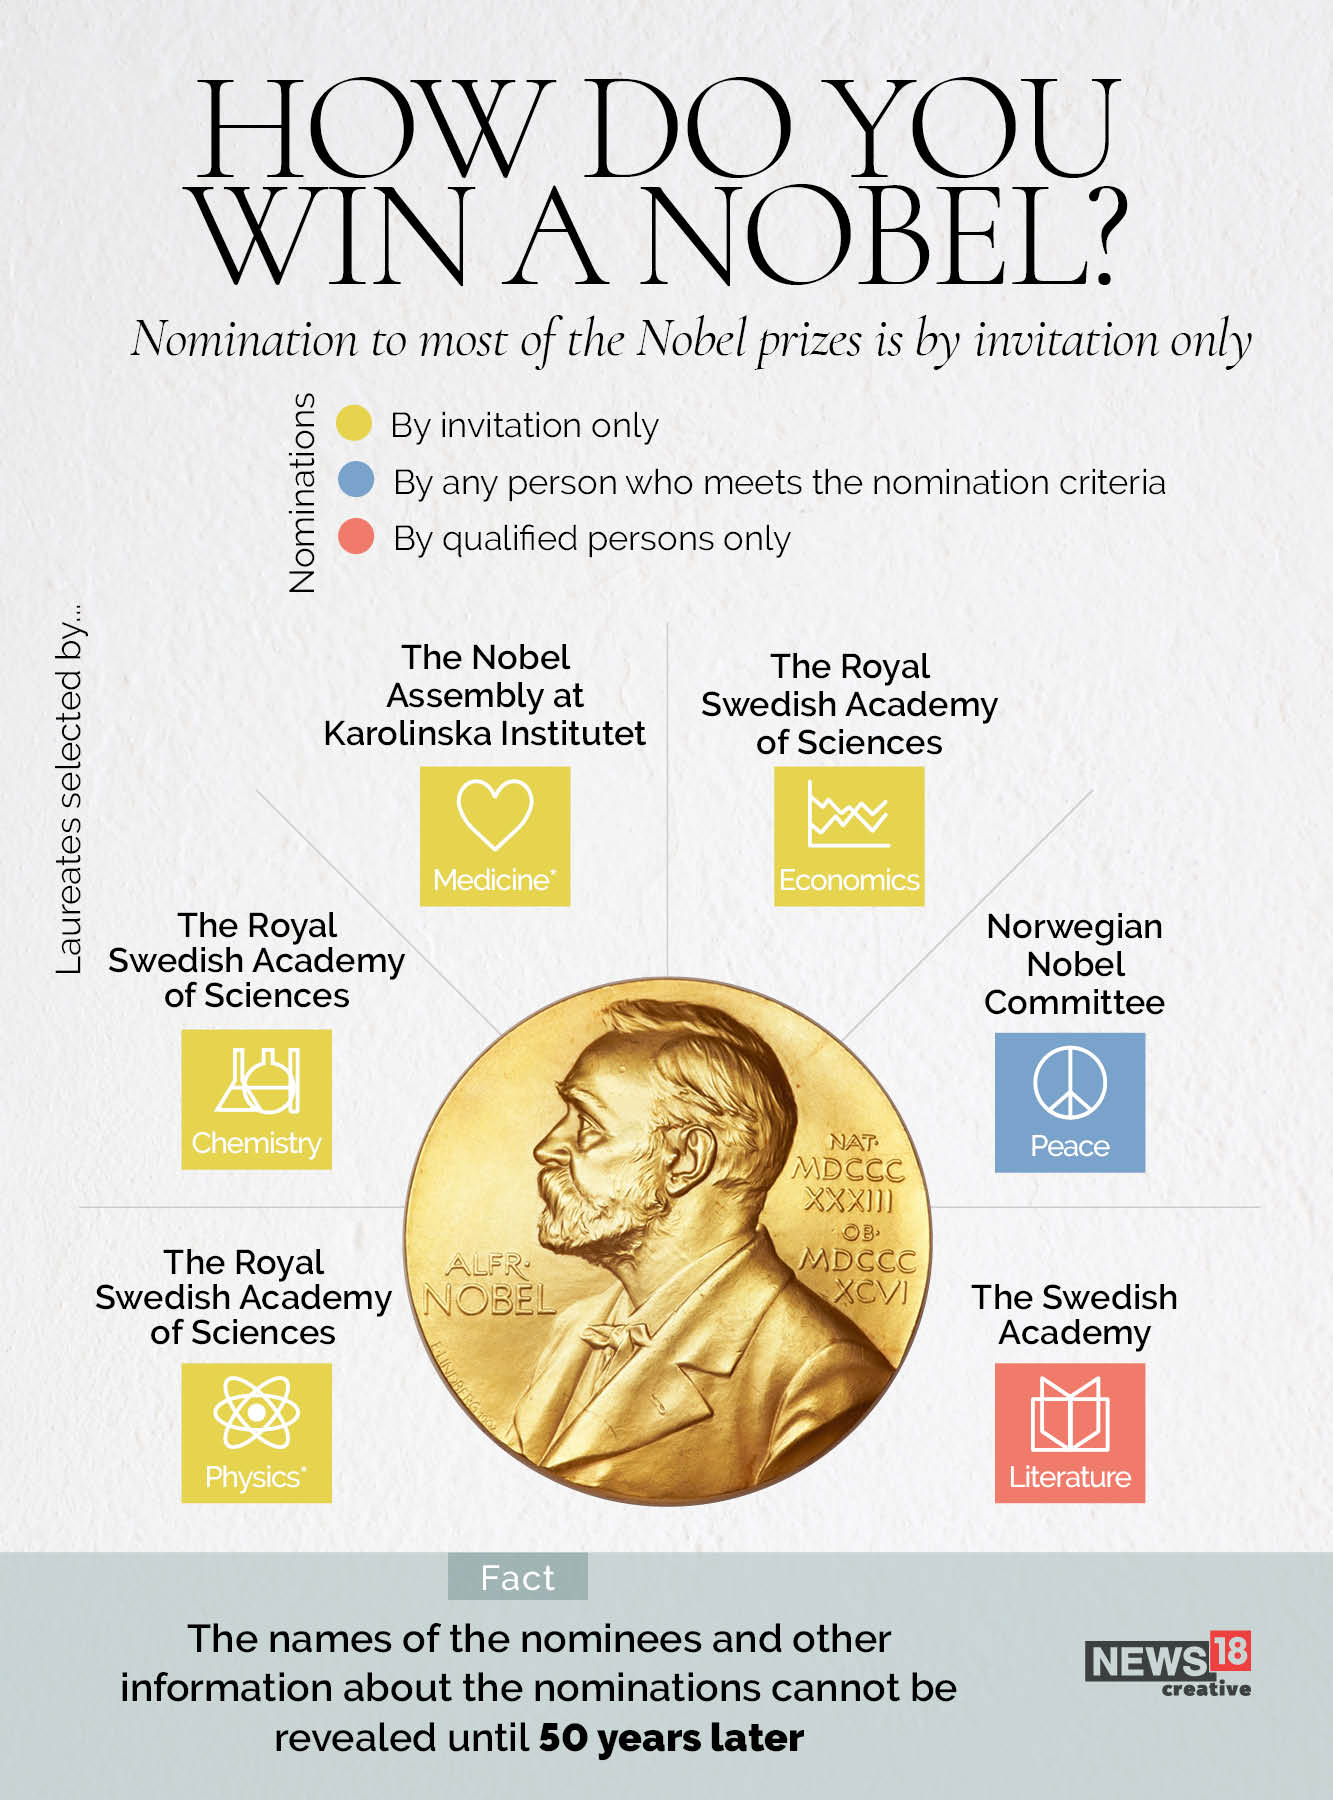 How many women have won the Nobel Prize?